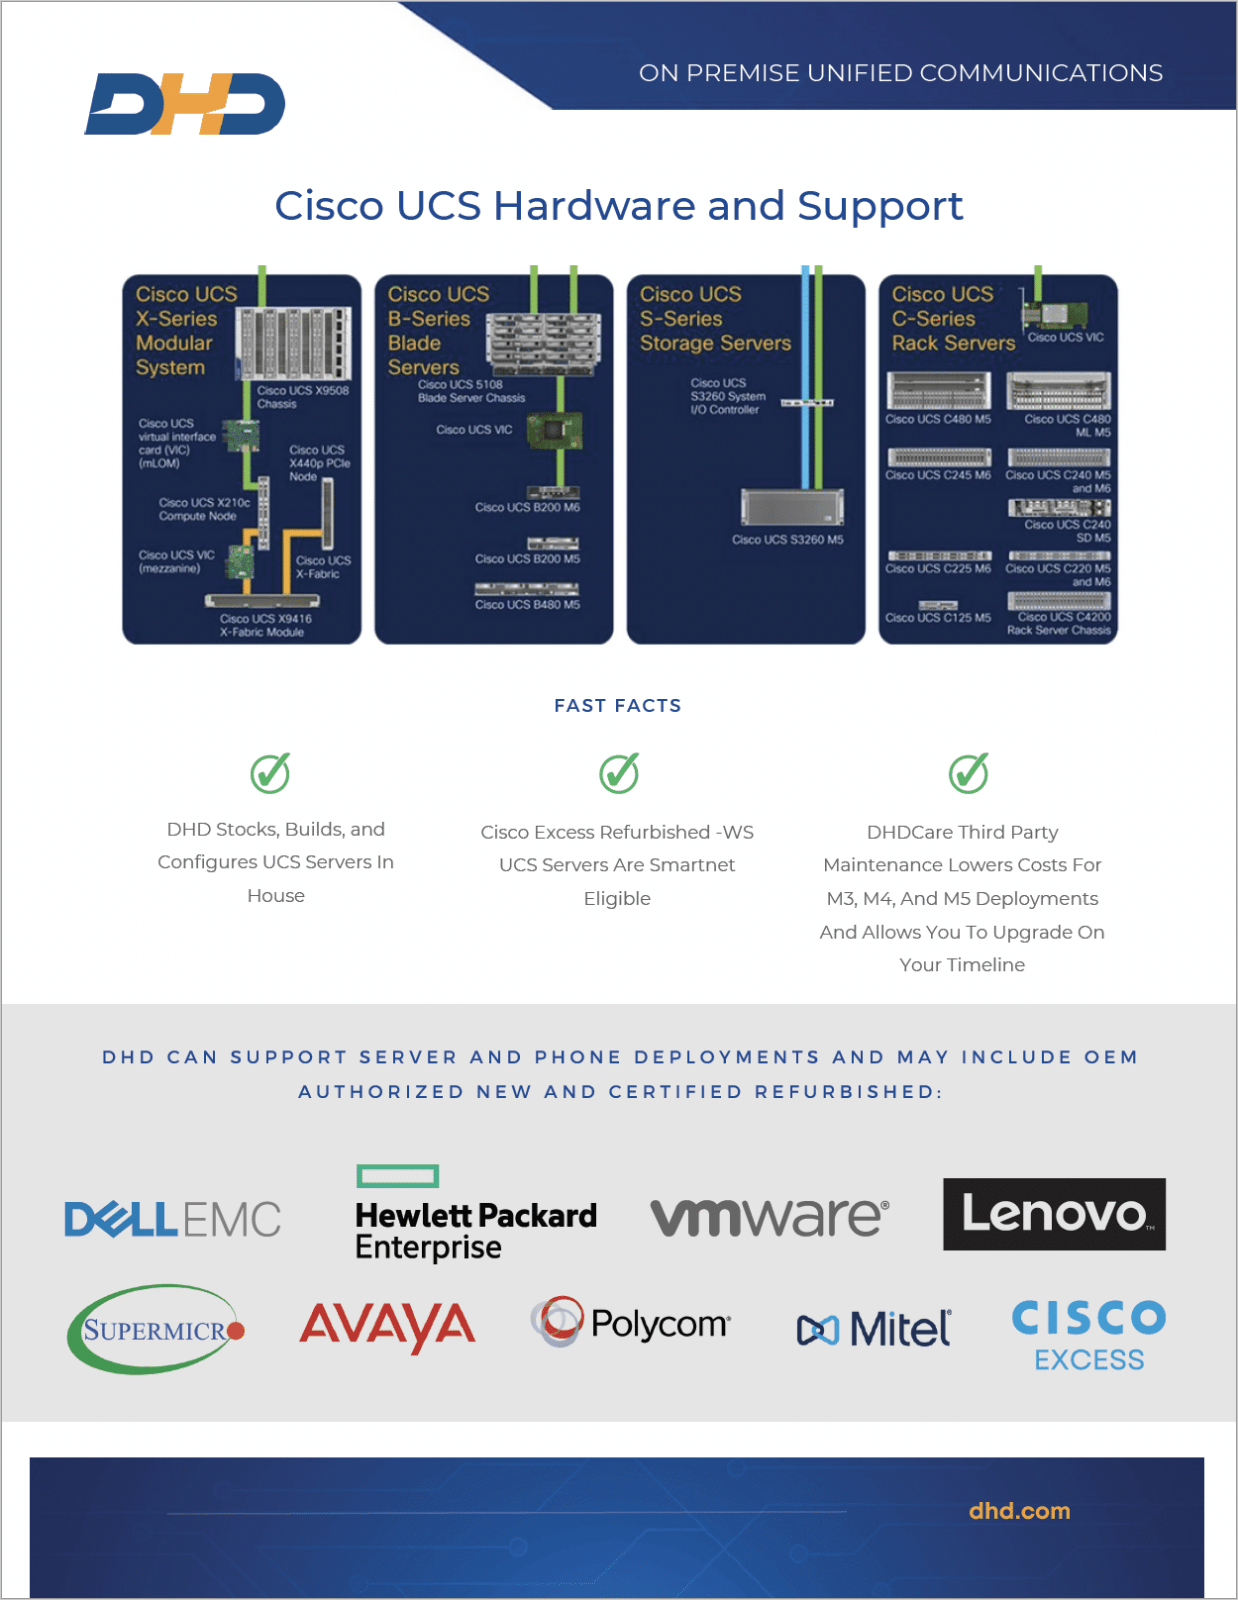 Cisco UCS Hardware and Support